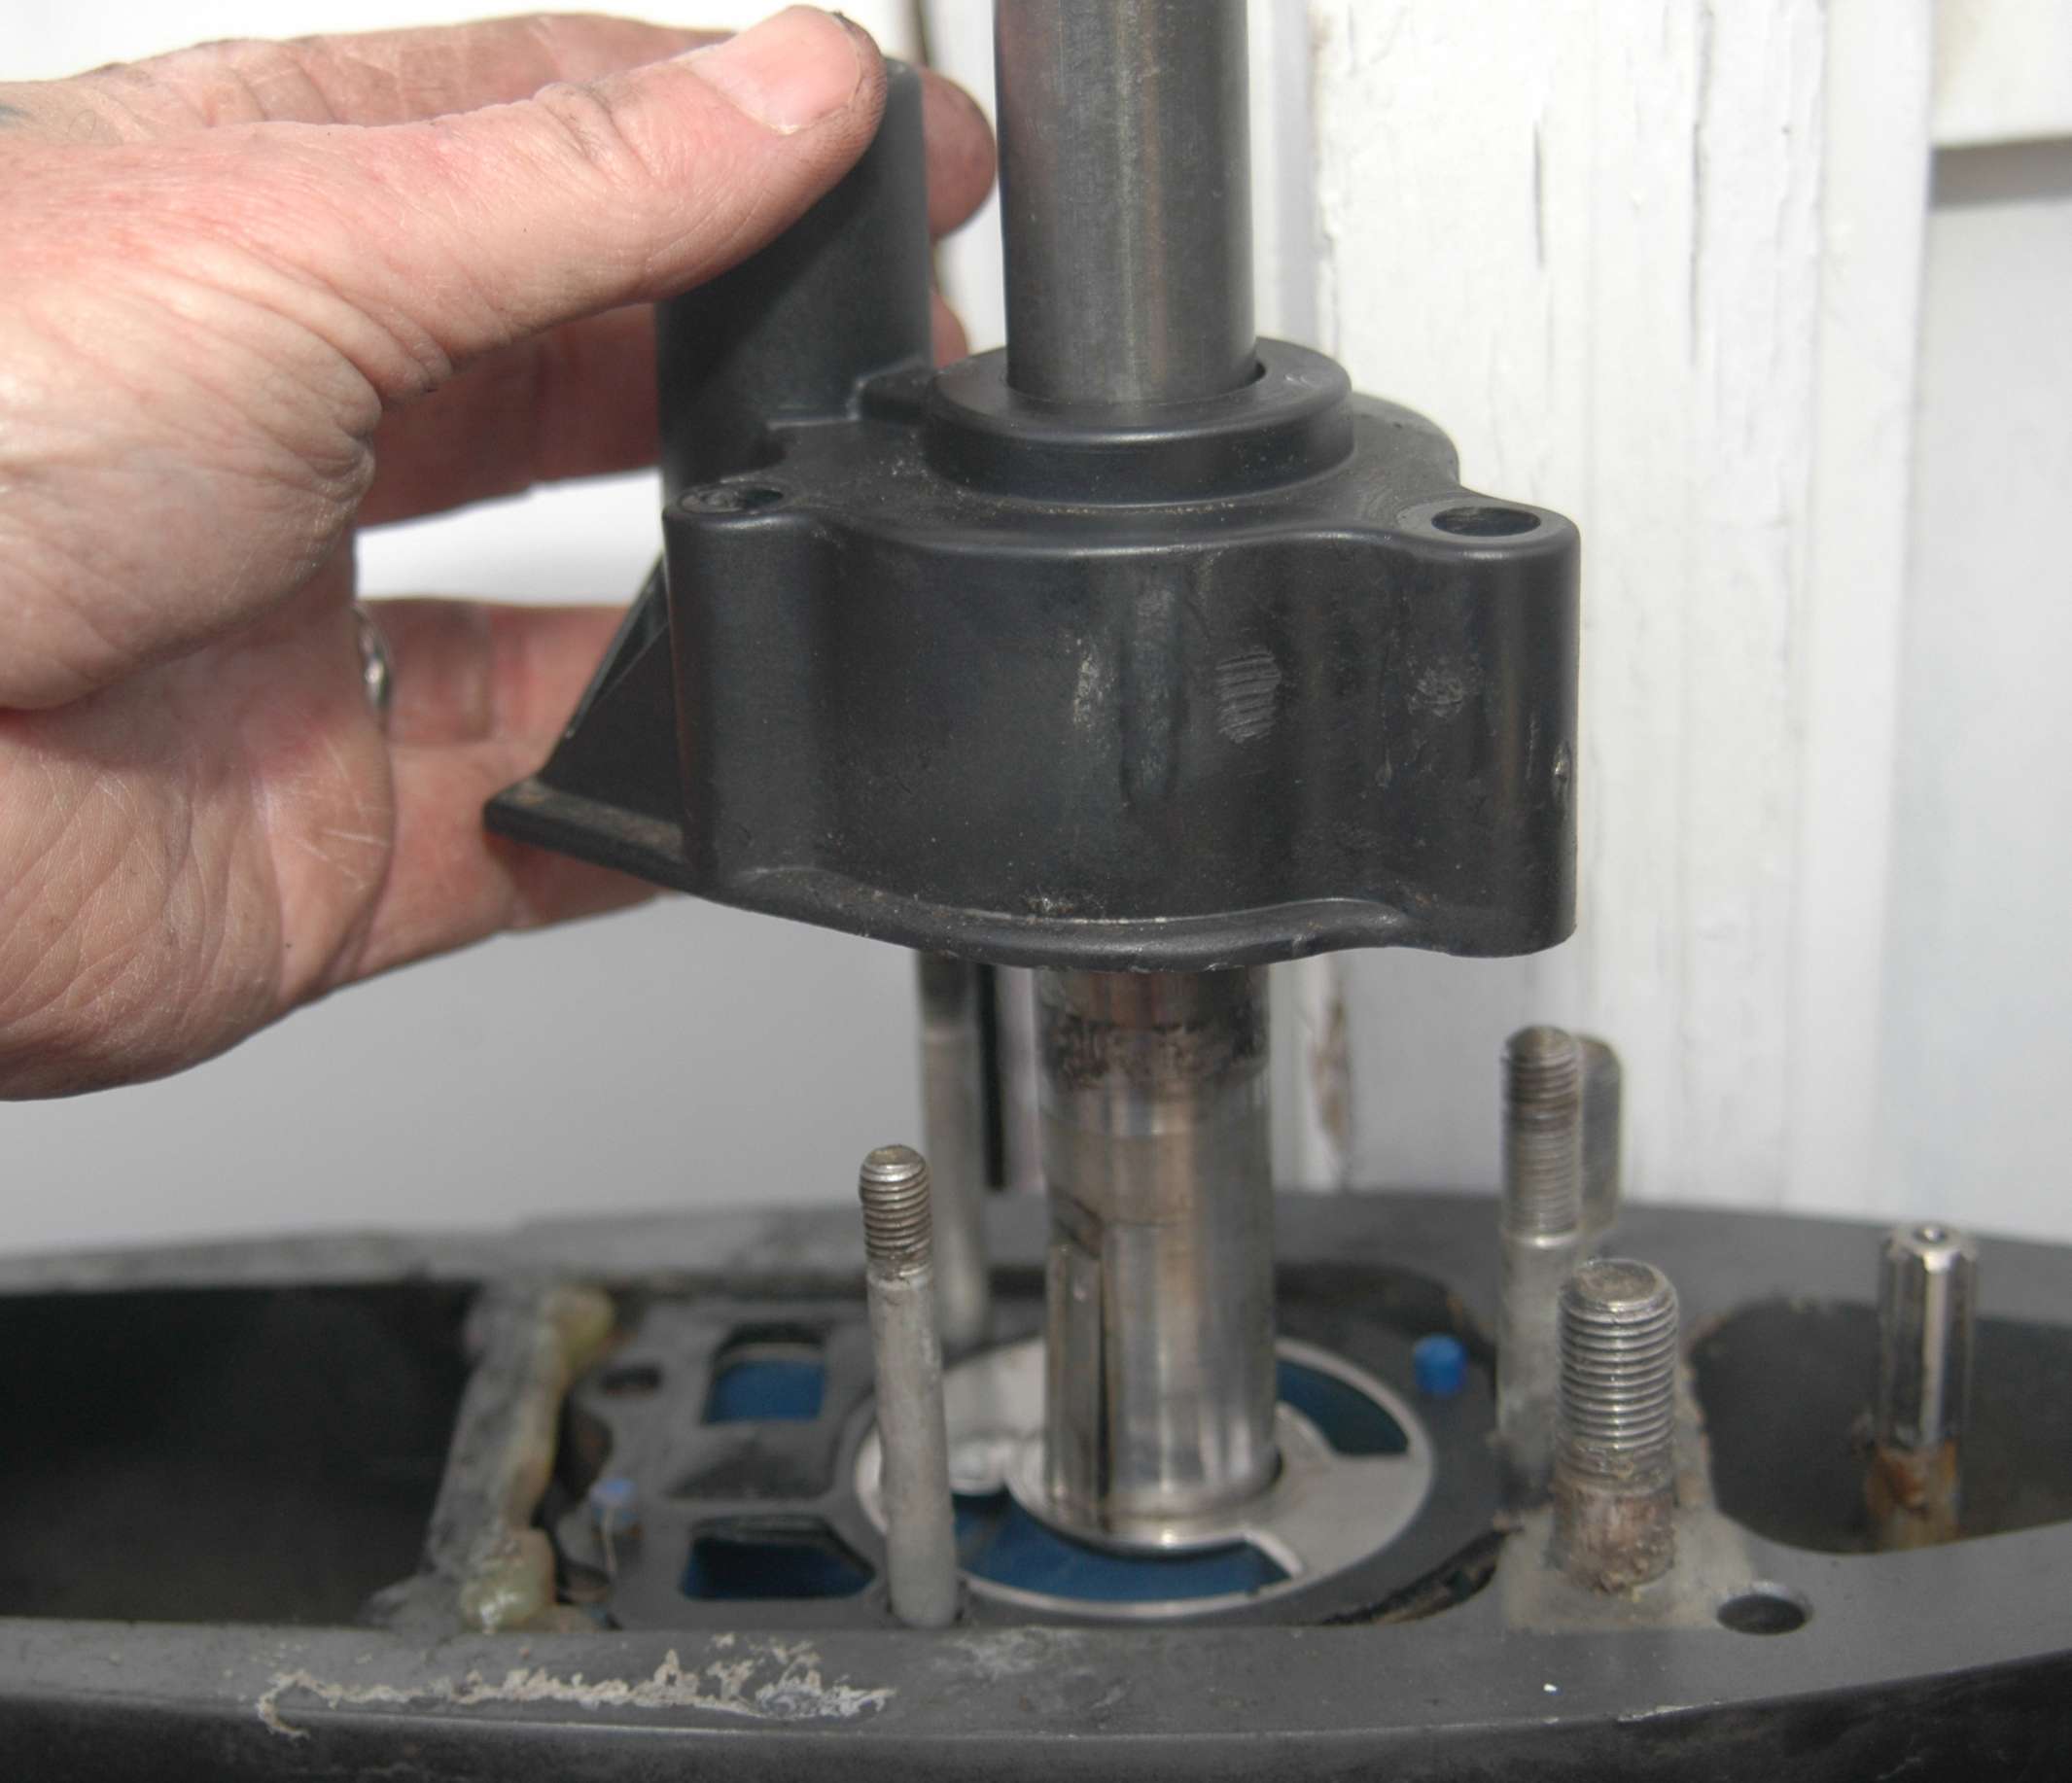 <em>REBUILDING THE WATER PUMP</em>
<br>After removing the nuts, slide the water pump housing straight up and off the drive shaft. The impeller typically stays inside the housing.